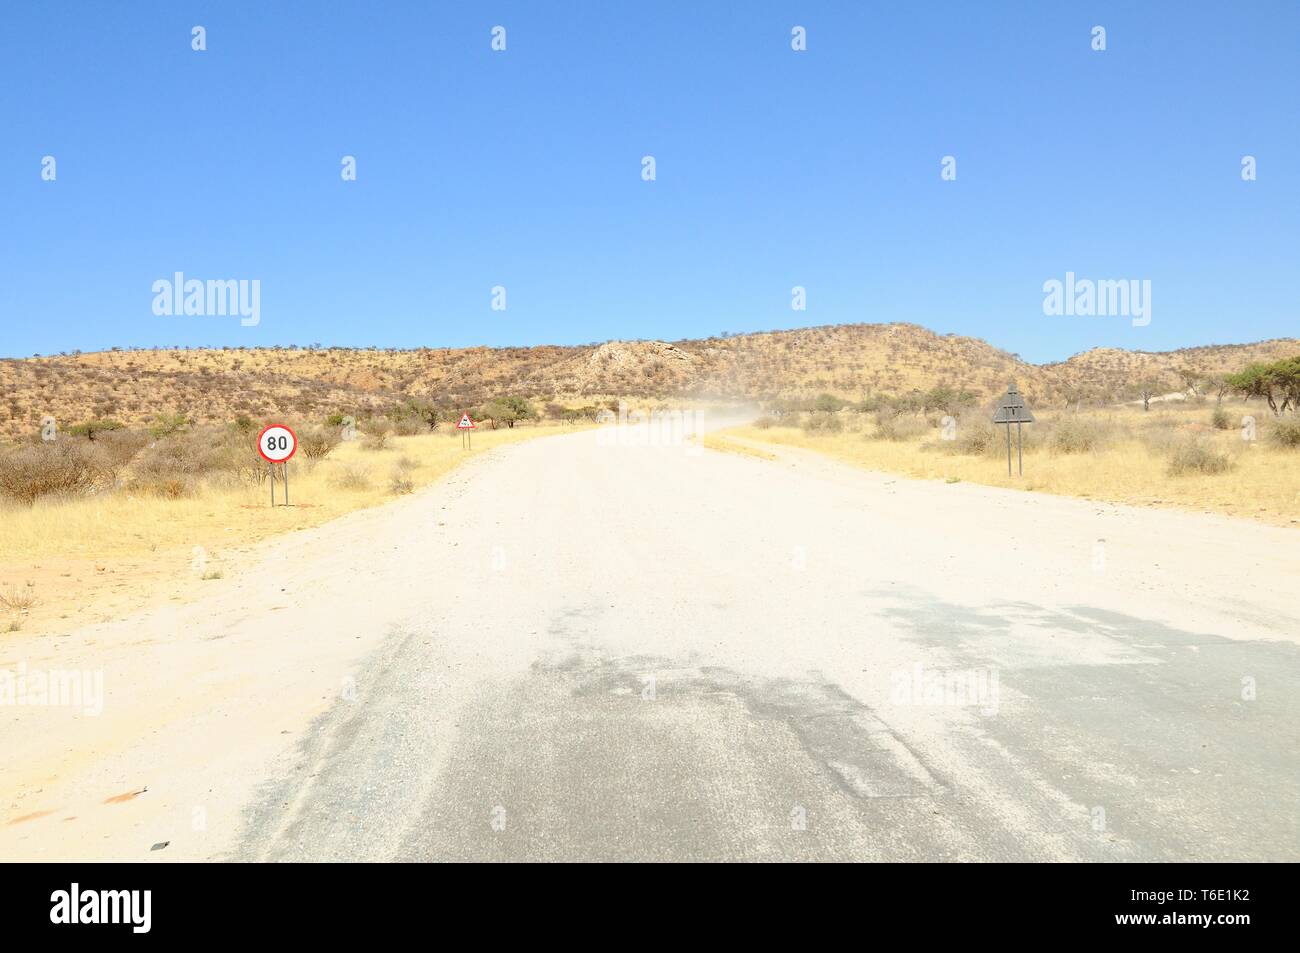 End of civilization - start of the gravel road Stock Photo